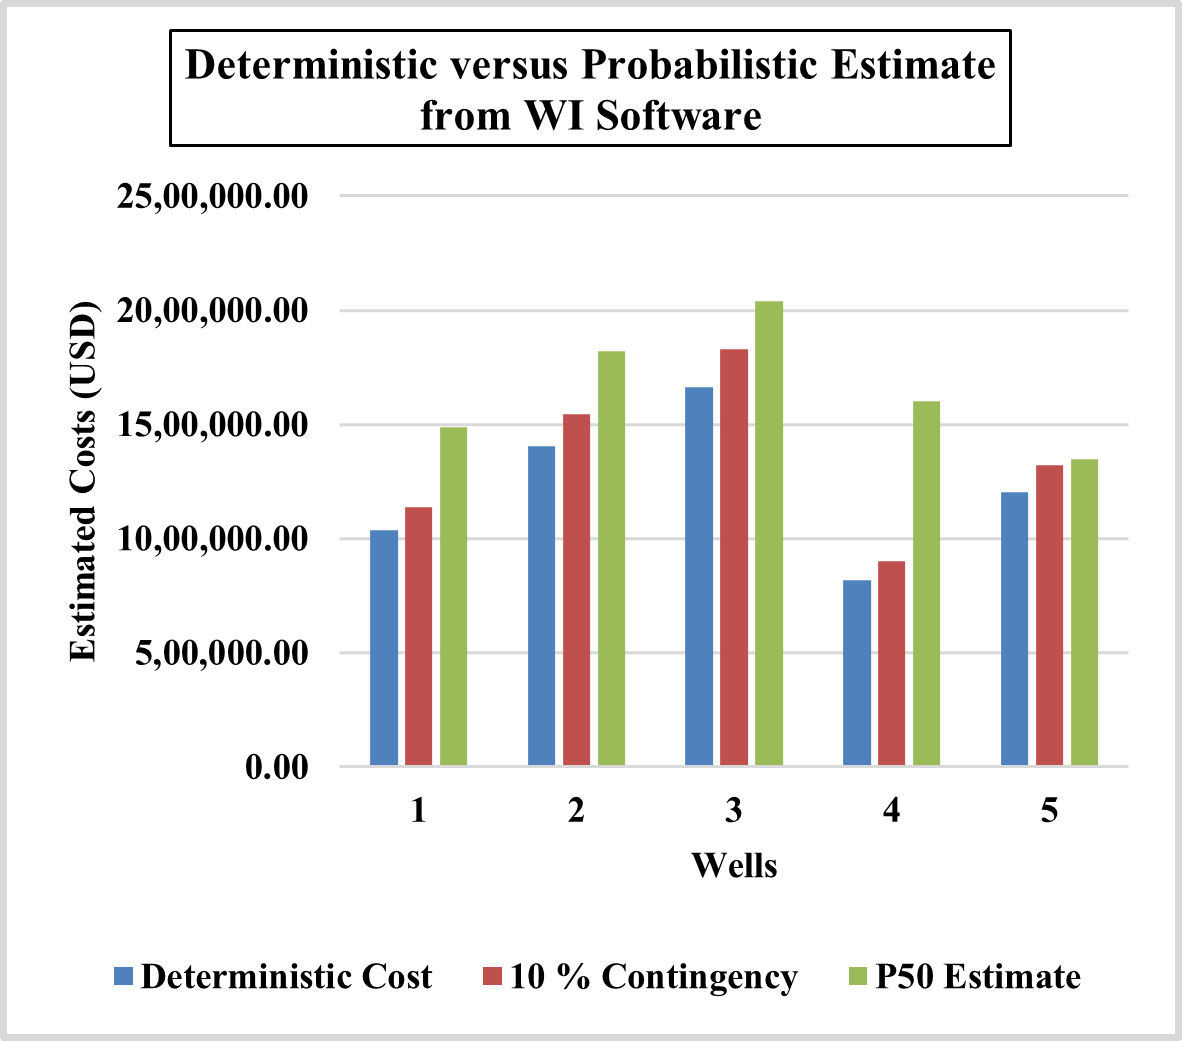 Comparison of the existing deterministic cost estimate versus the probabilistic estimate (P50) calculated from the Well Intervention (WI) software.